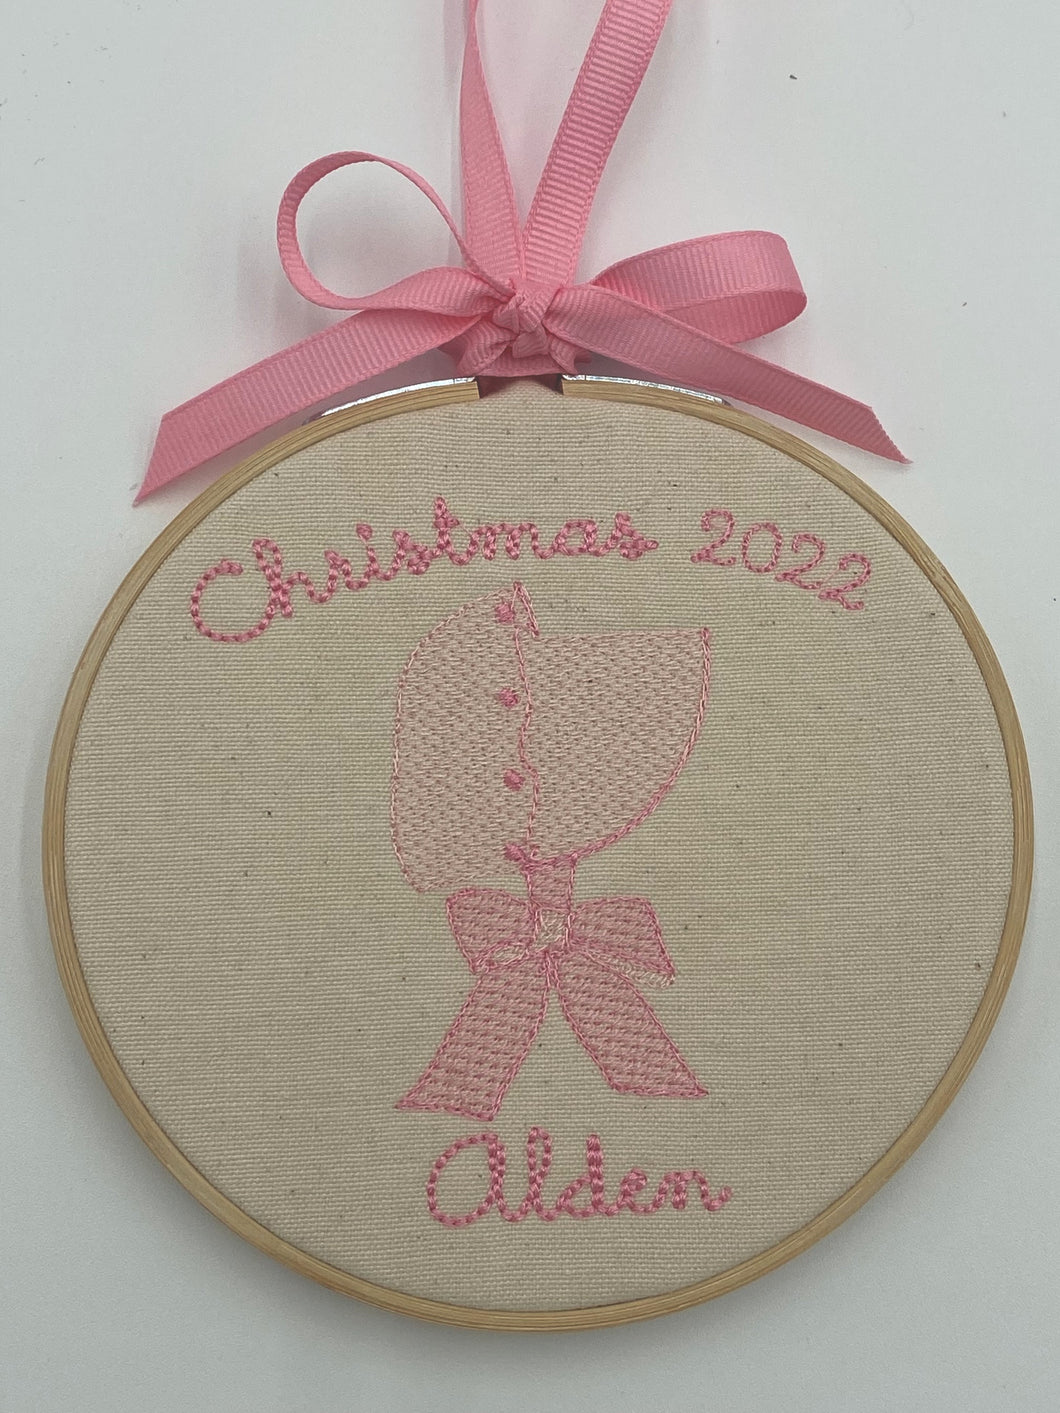 Personalized Embroidered Pink Vintage Bonnet Ornament